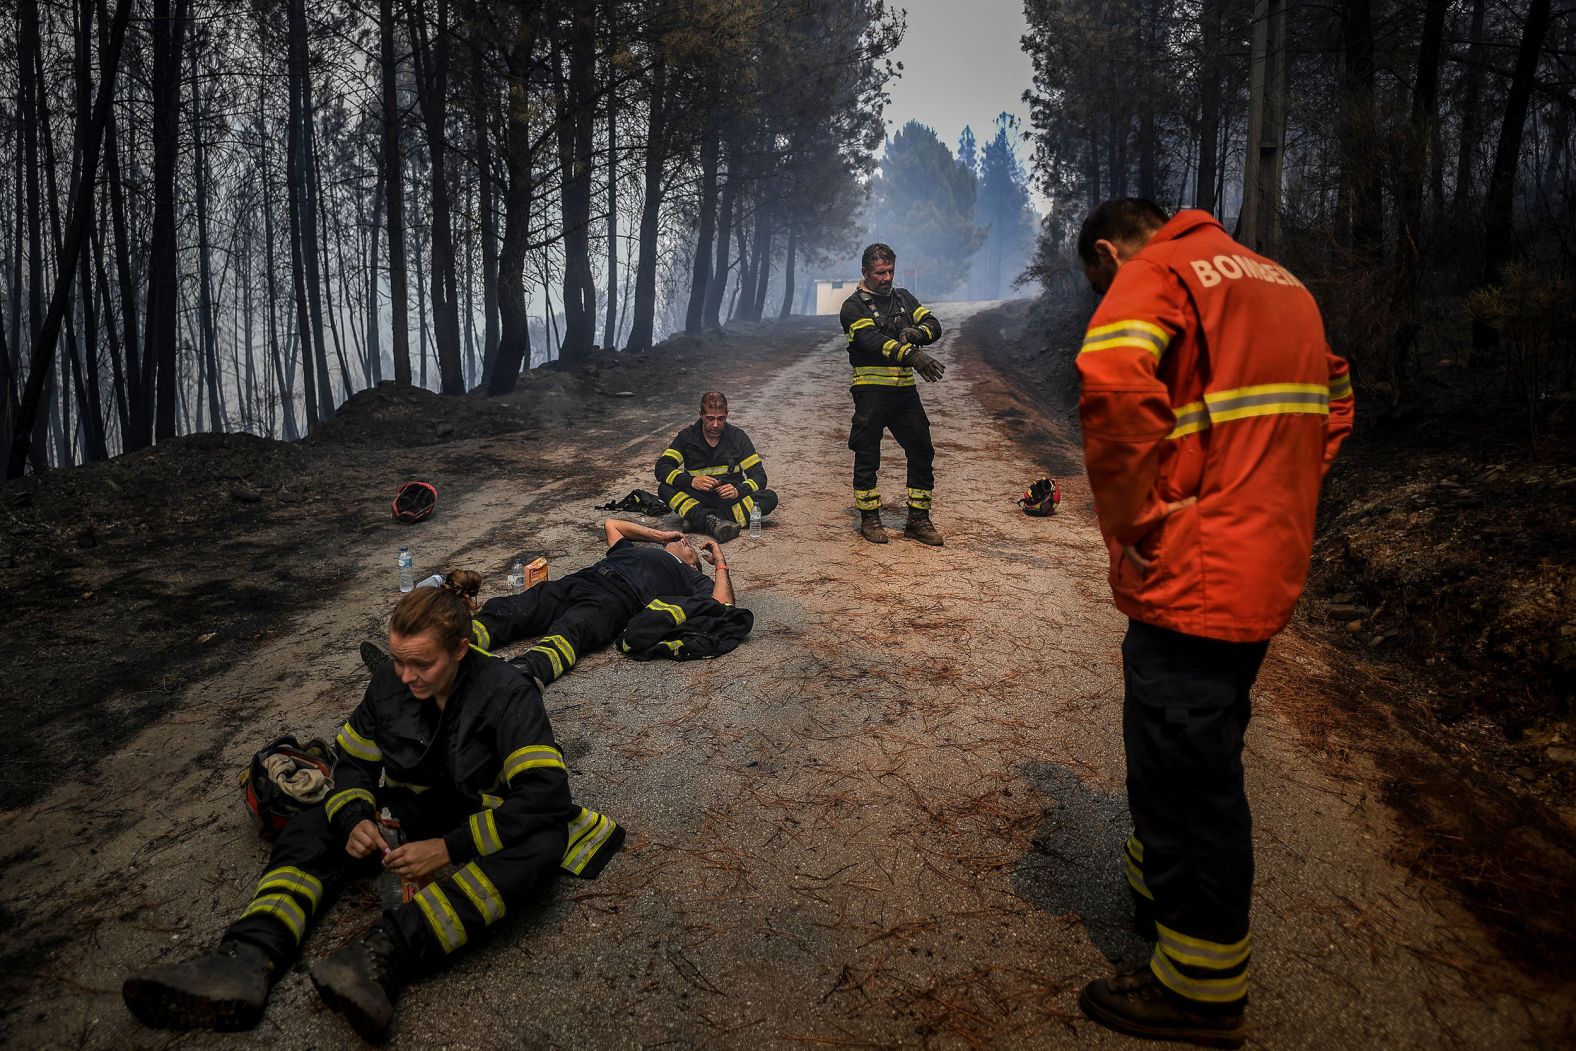 Firefighters drink water and recover while fighting a wildfire in the Portuguese village of Sameiro on Wednesday, August 10.